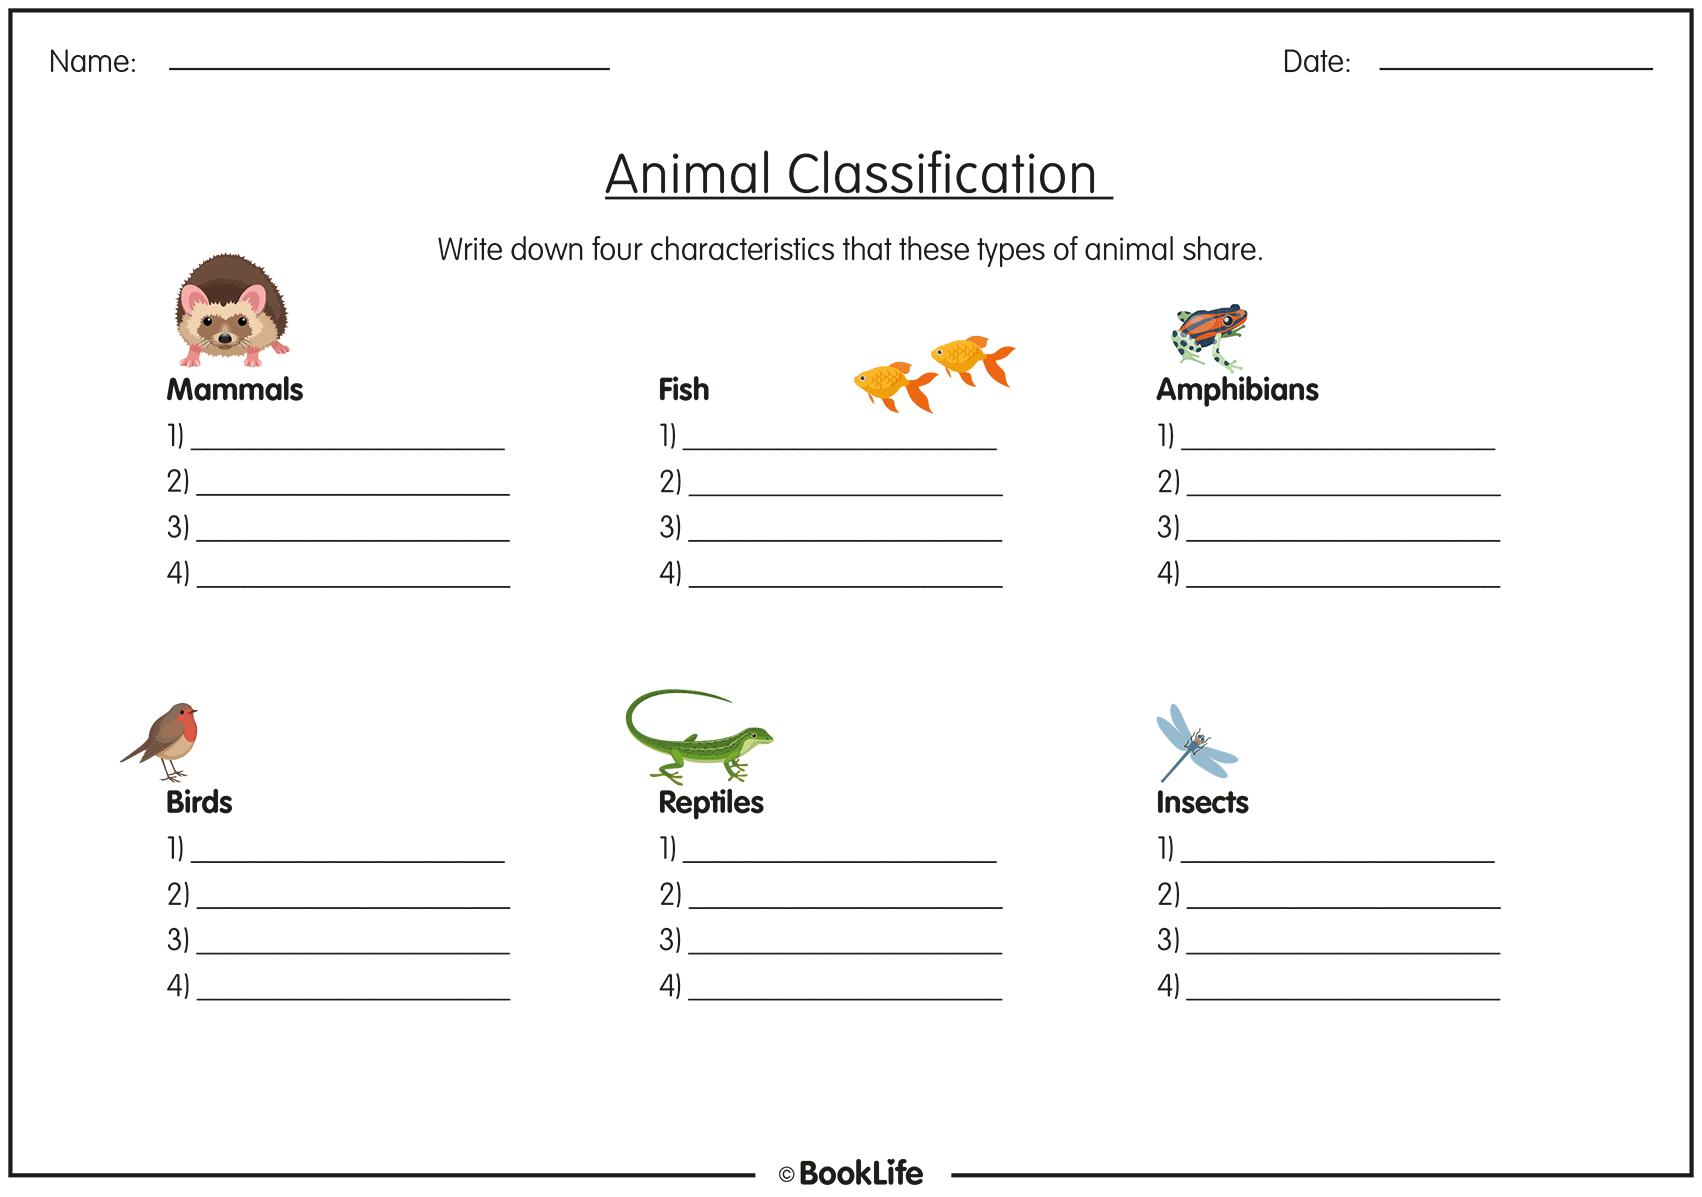 Animal Classification by BookLife